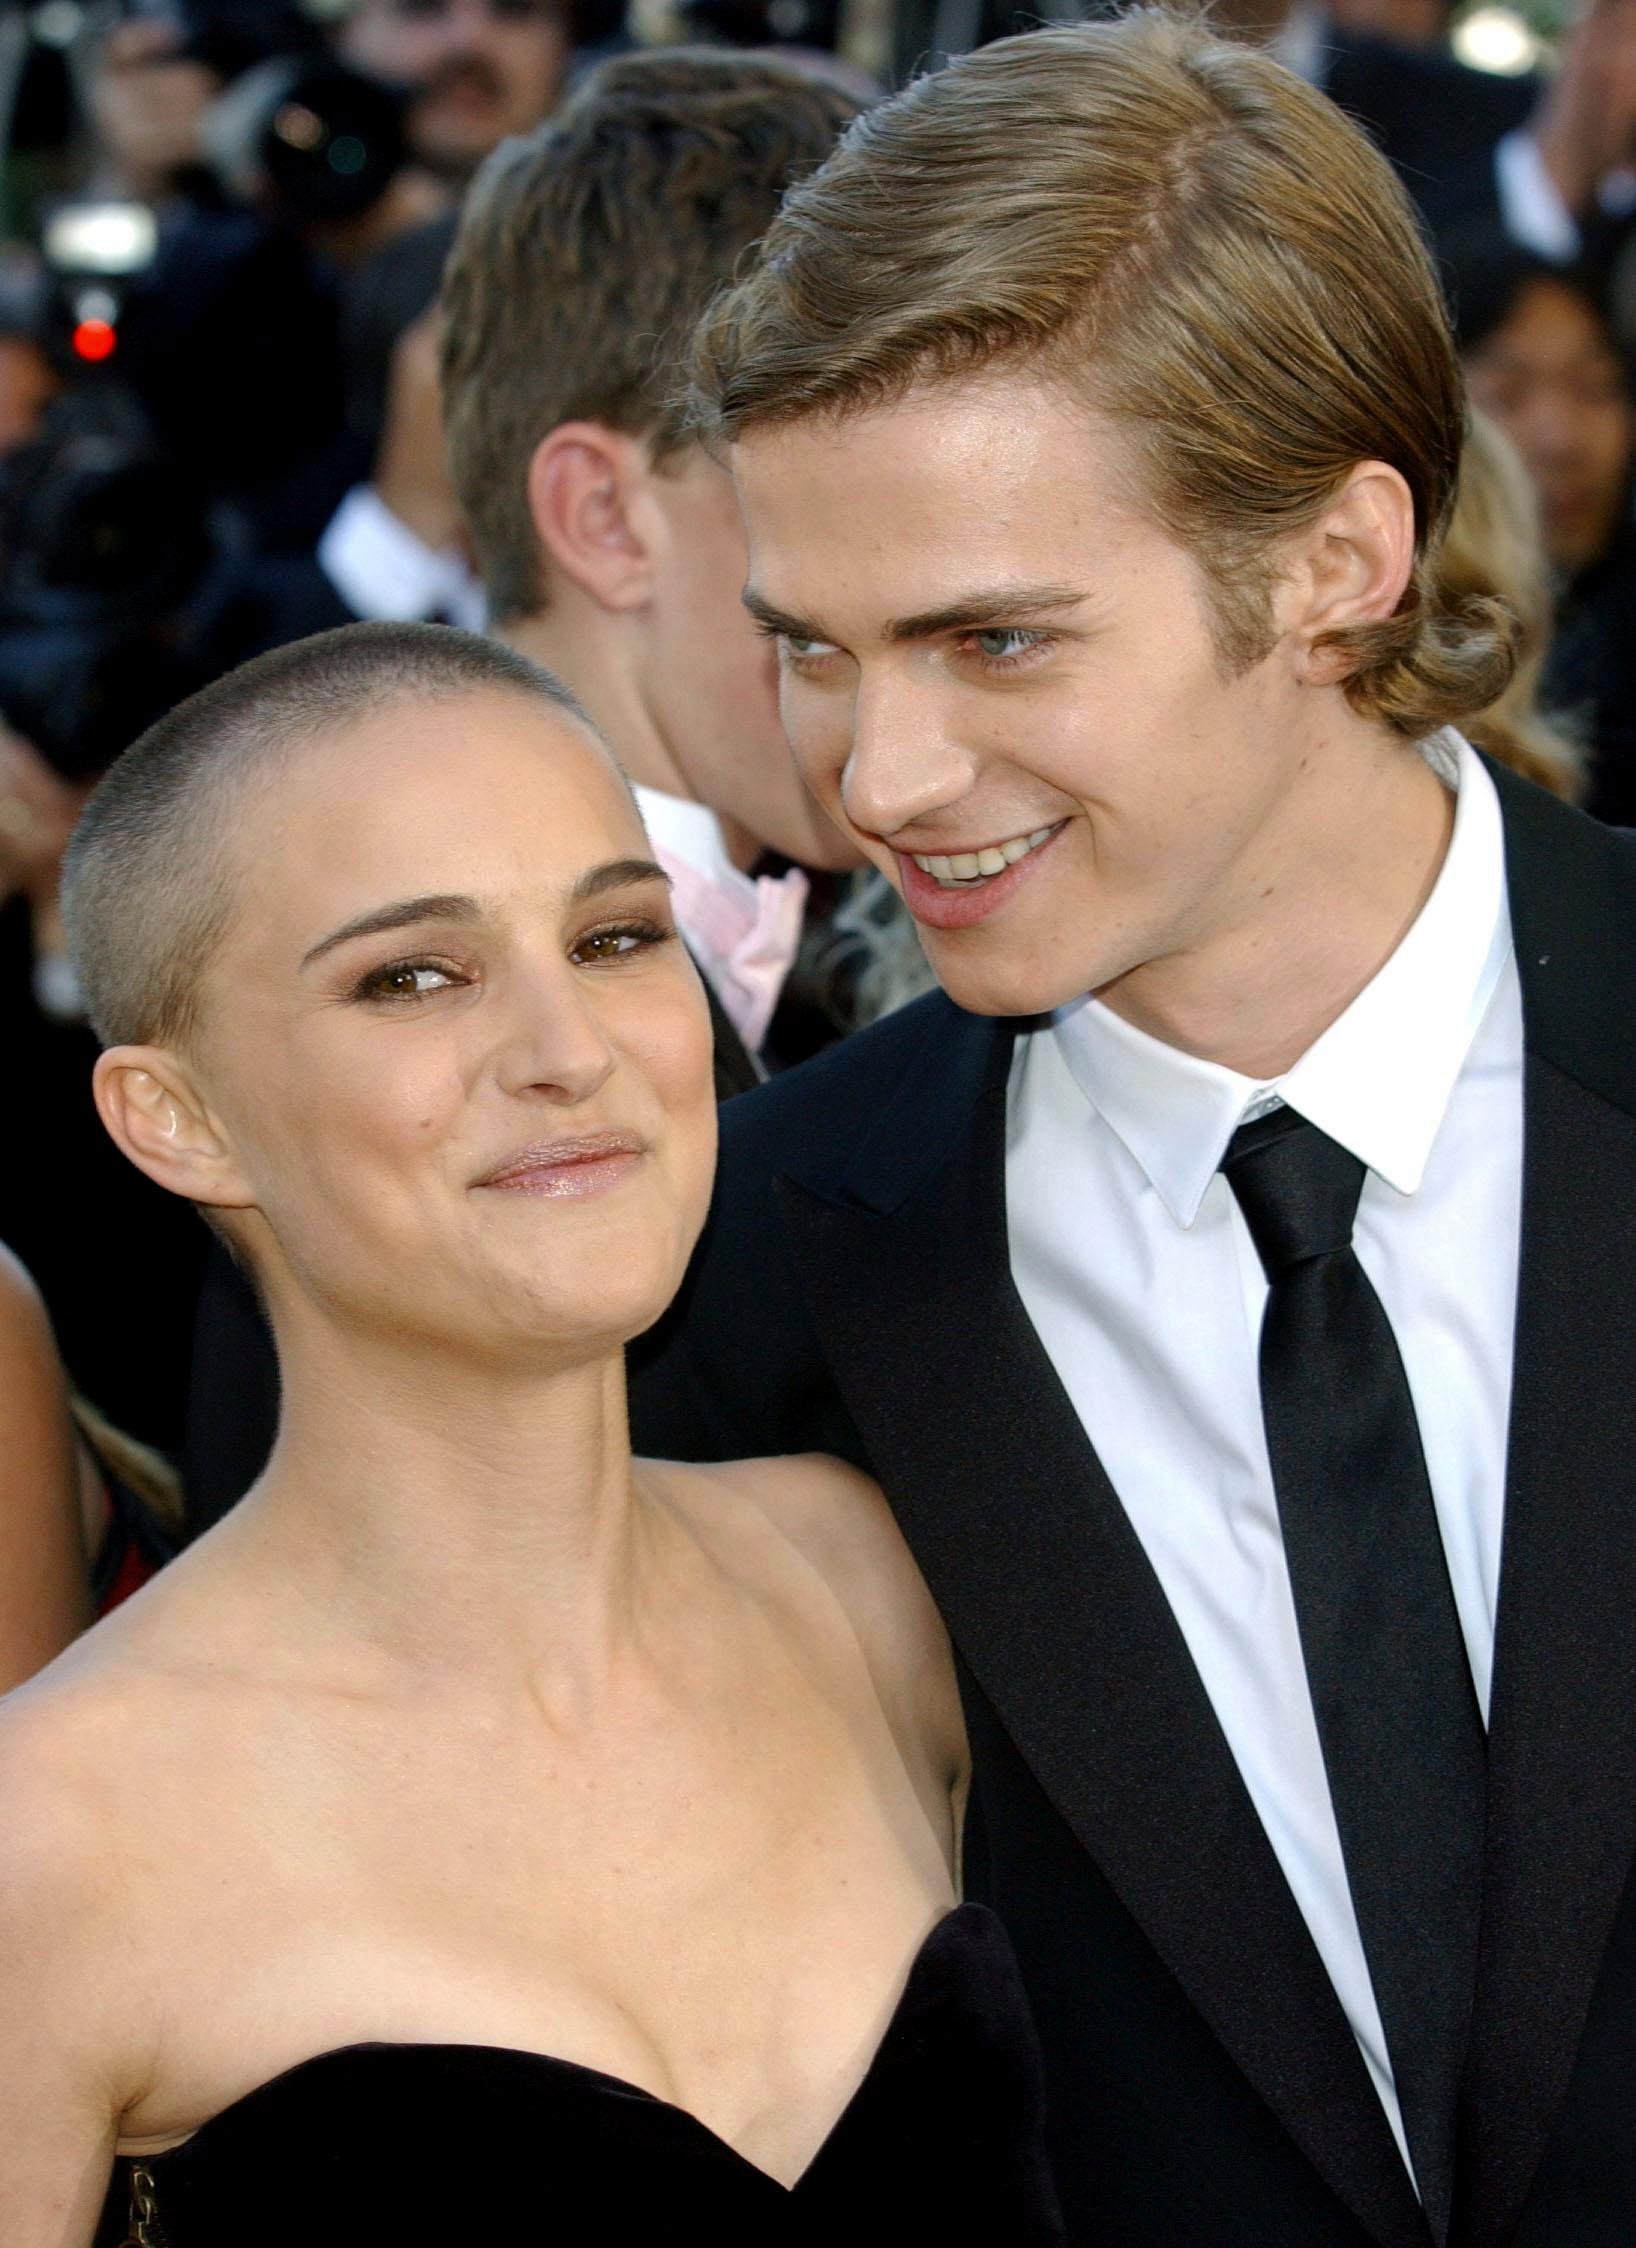 Natalie Portman and Hayden Christensen at the 2005 Cannes Film Festival on May 15, 2005 | Source: Getty Images